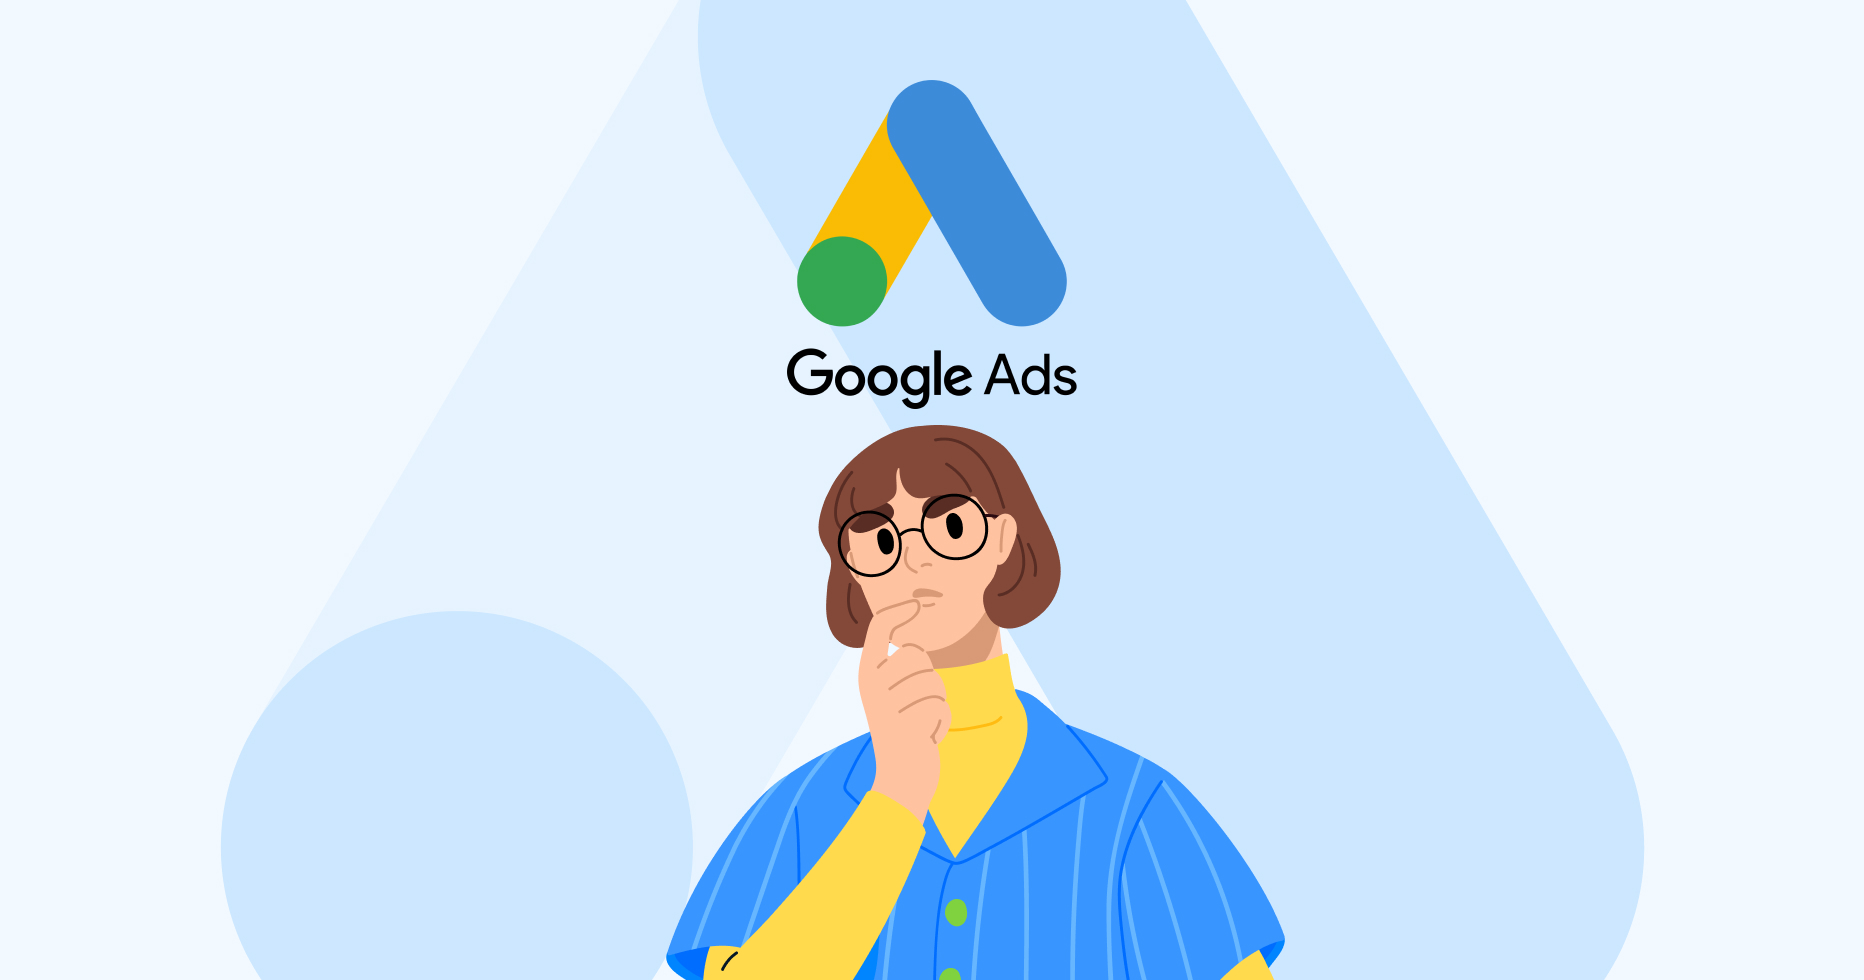 Showing girl with glasses thinking and logo of Google Ads